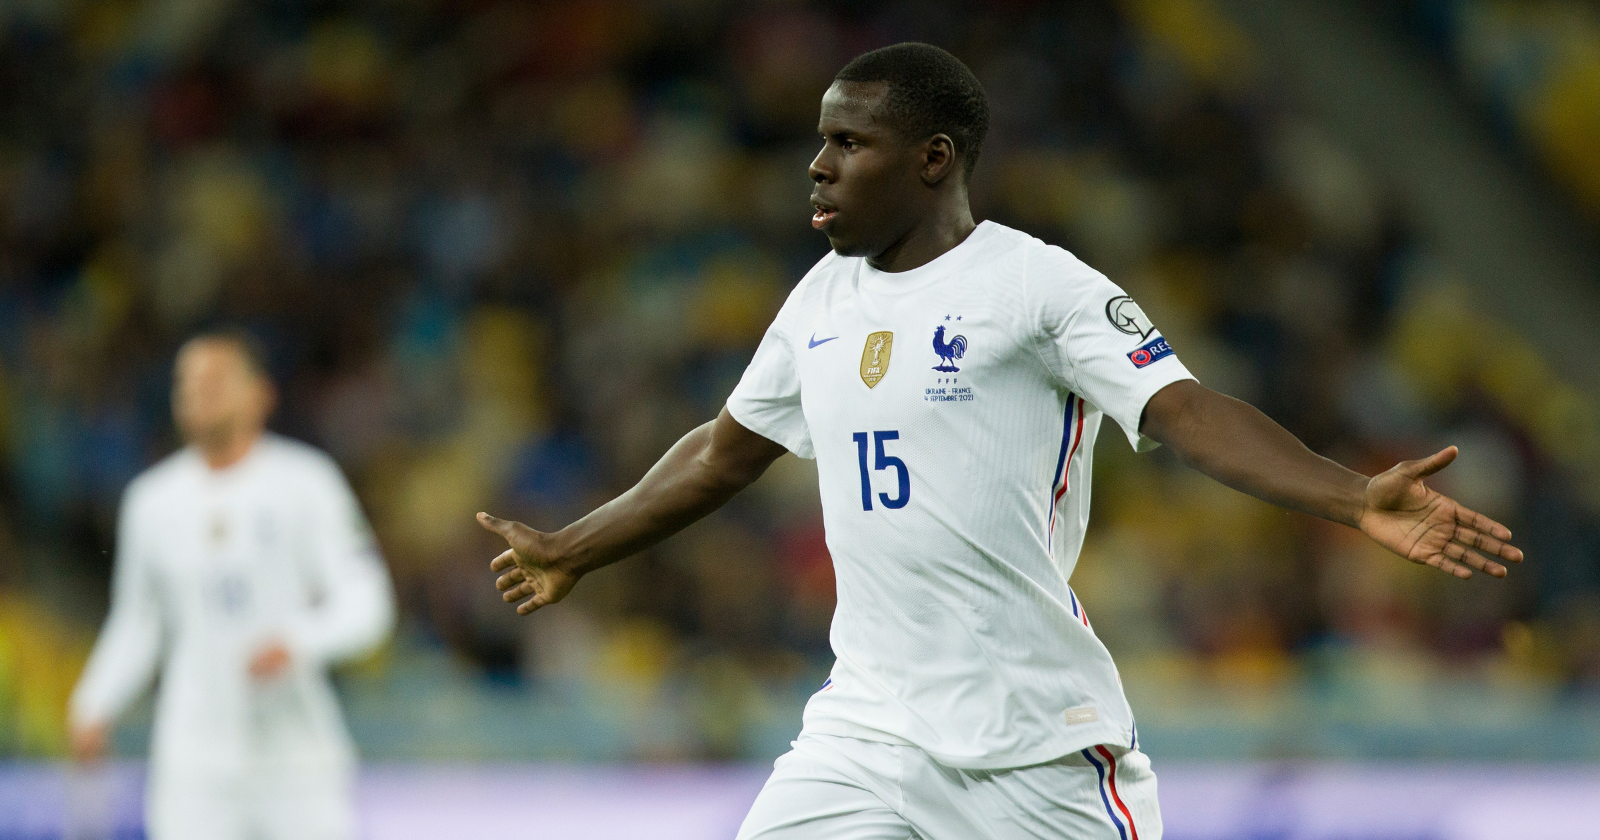 Kurt Zouma case: the players fine was donated to animal protection associations